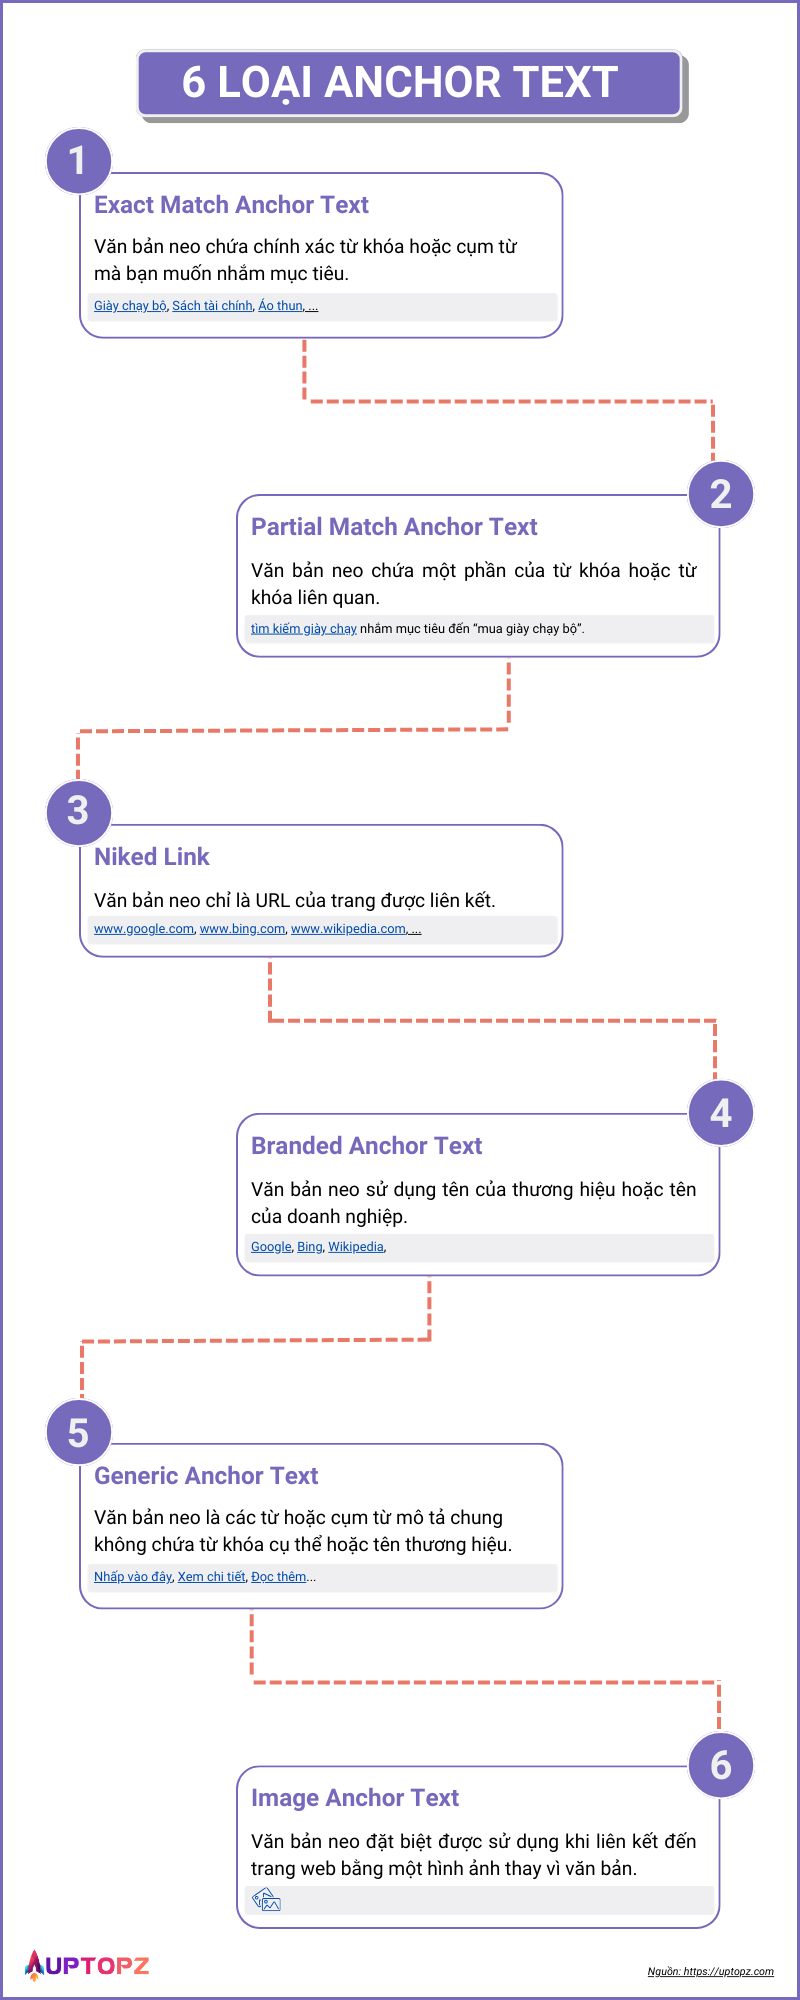 6 loại anchor text phổ biến gồm Exact match, Partial Match, Niked Link, Branded anchor text, Generic anchor text, Image Anchor tex